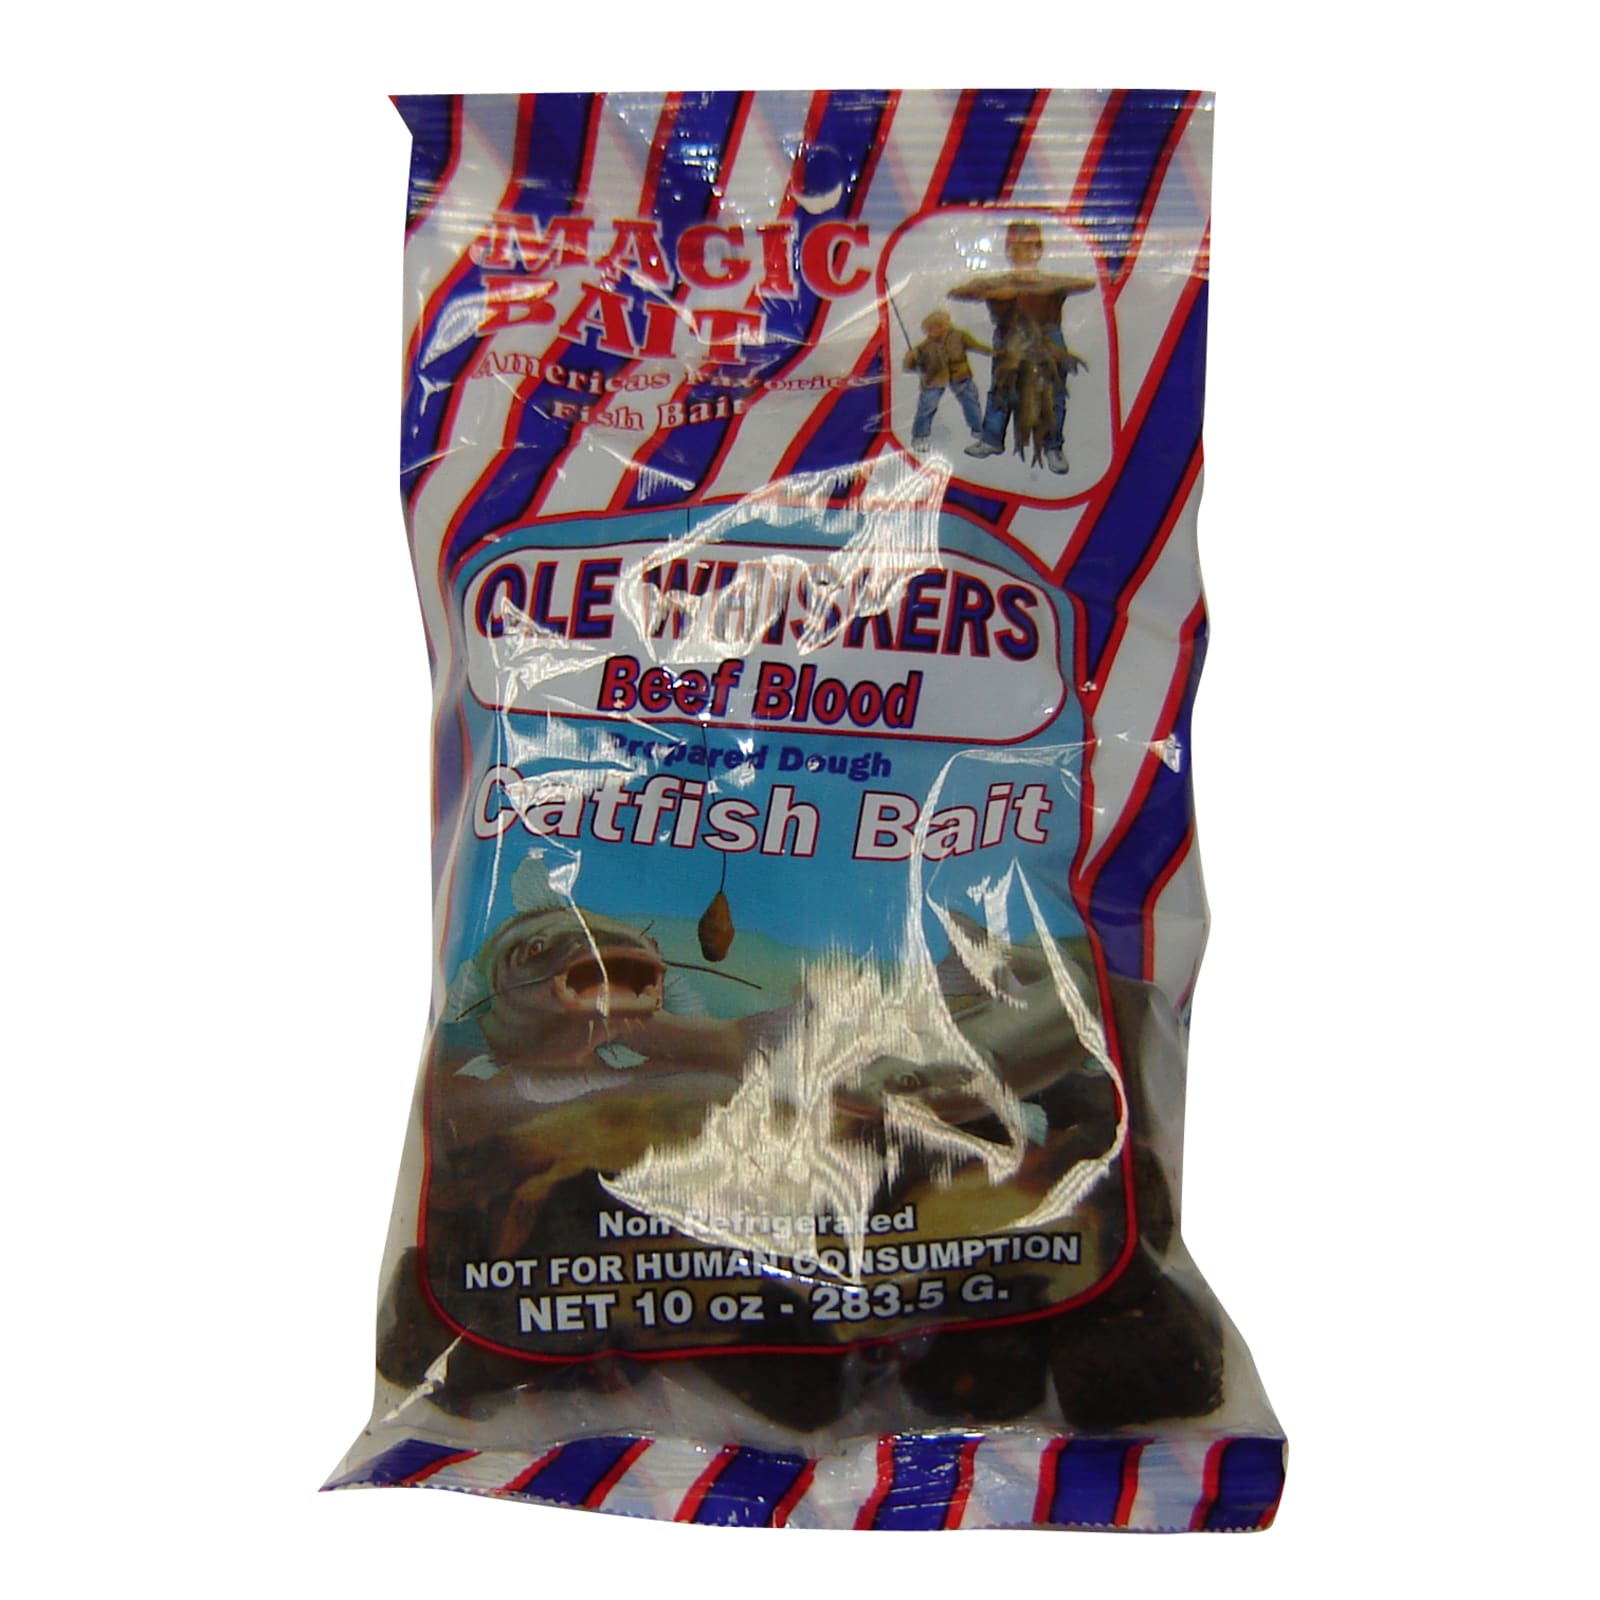 Cubed Catfish Bait - Ole Whiskers Beef Blood